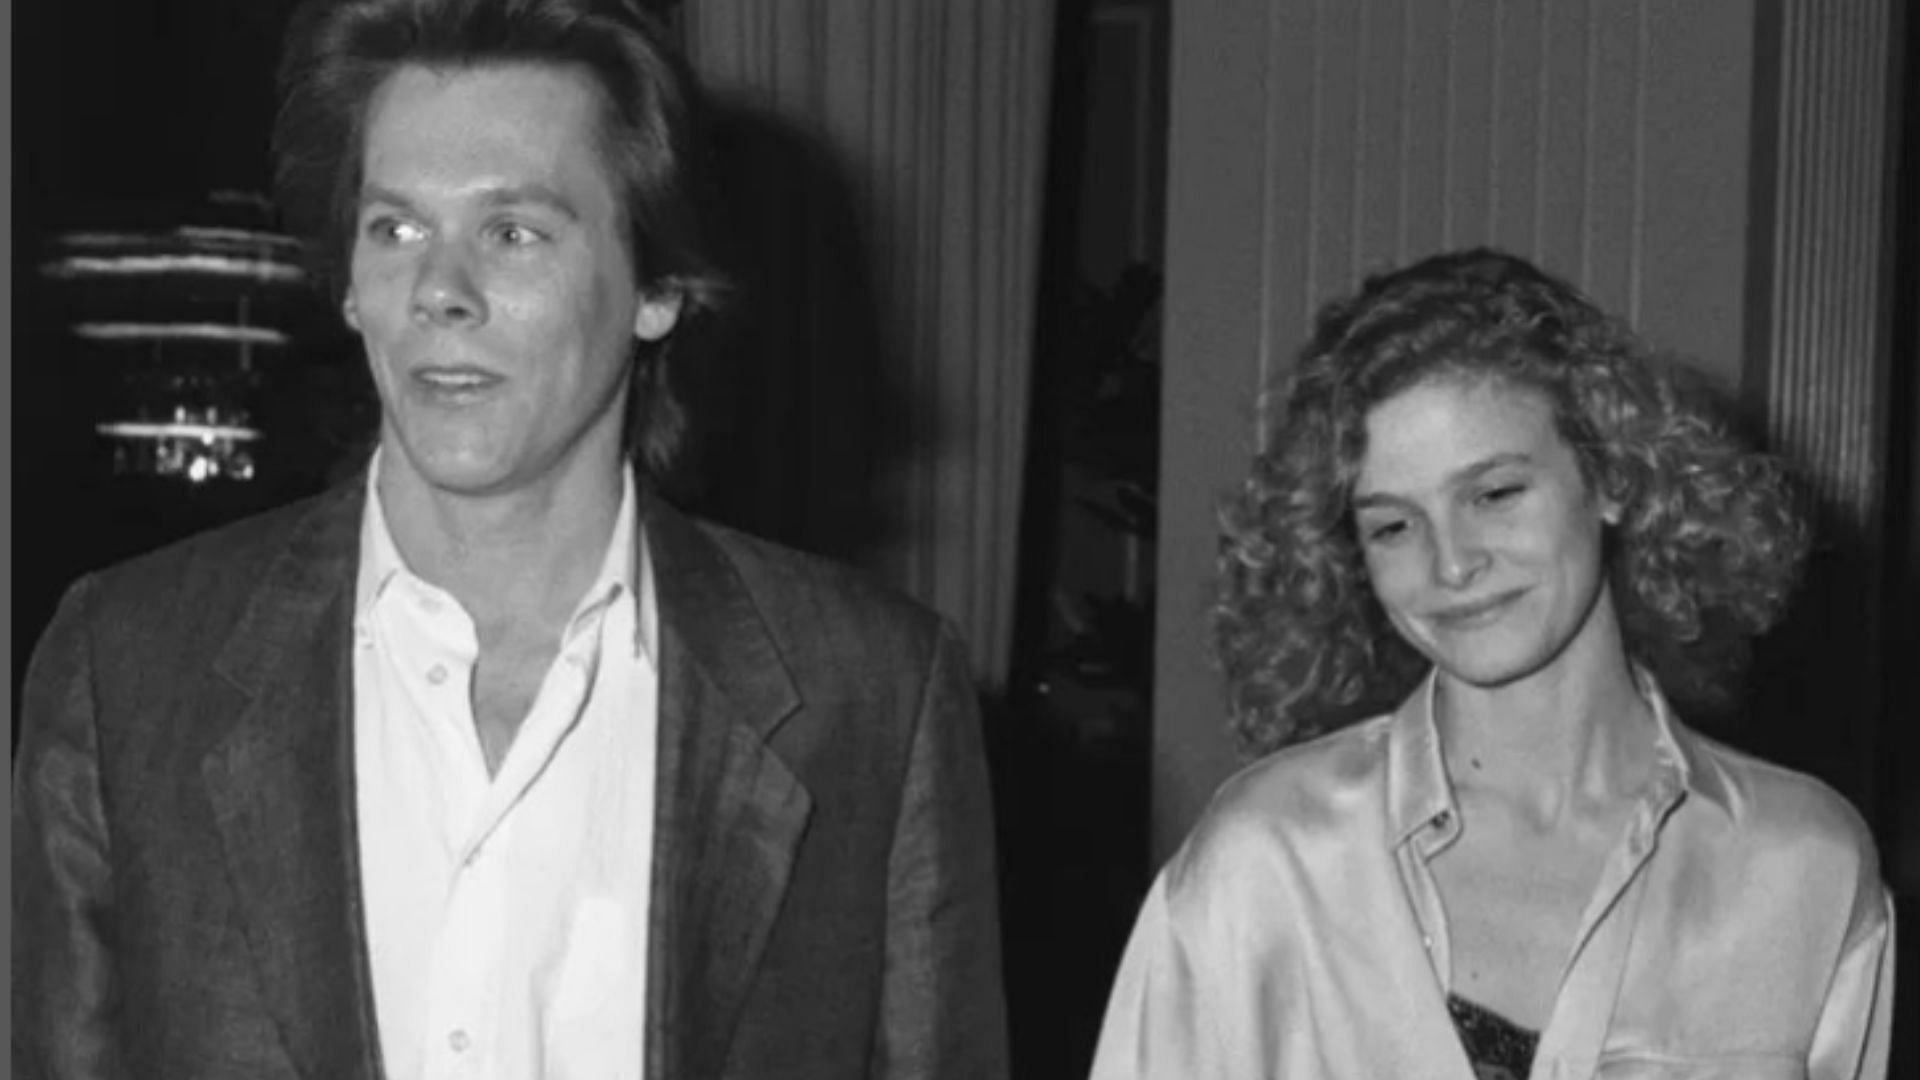 Kevin Bacon and Kyra Sedgwick have been married since 1988 and have two children together (Image via @kyrasedgwickofficial/Instagram)